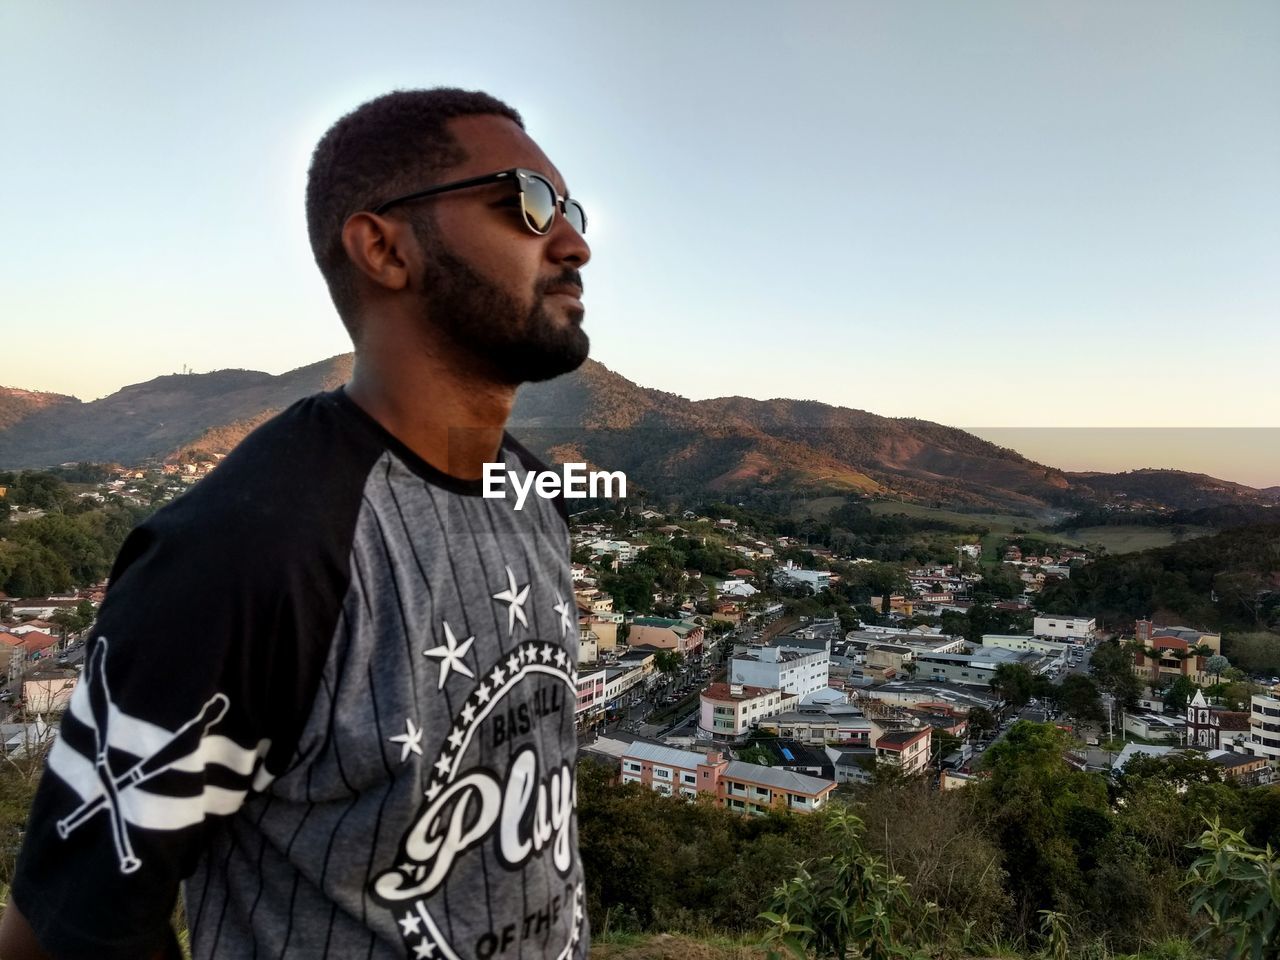 YOUNG MAN WEARING SUNGLASSES STANDING AGAINST MOUNTAIN IN CITY